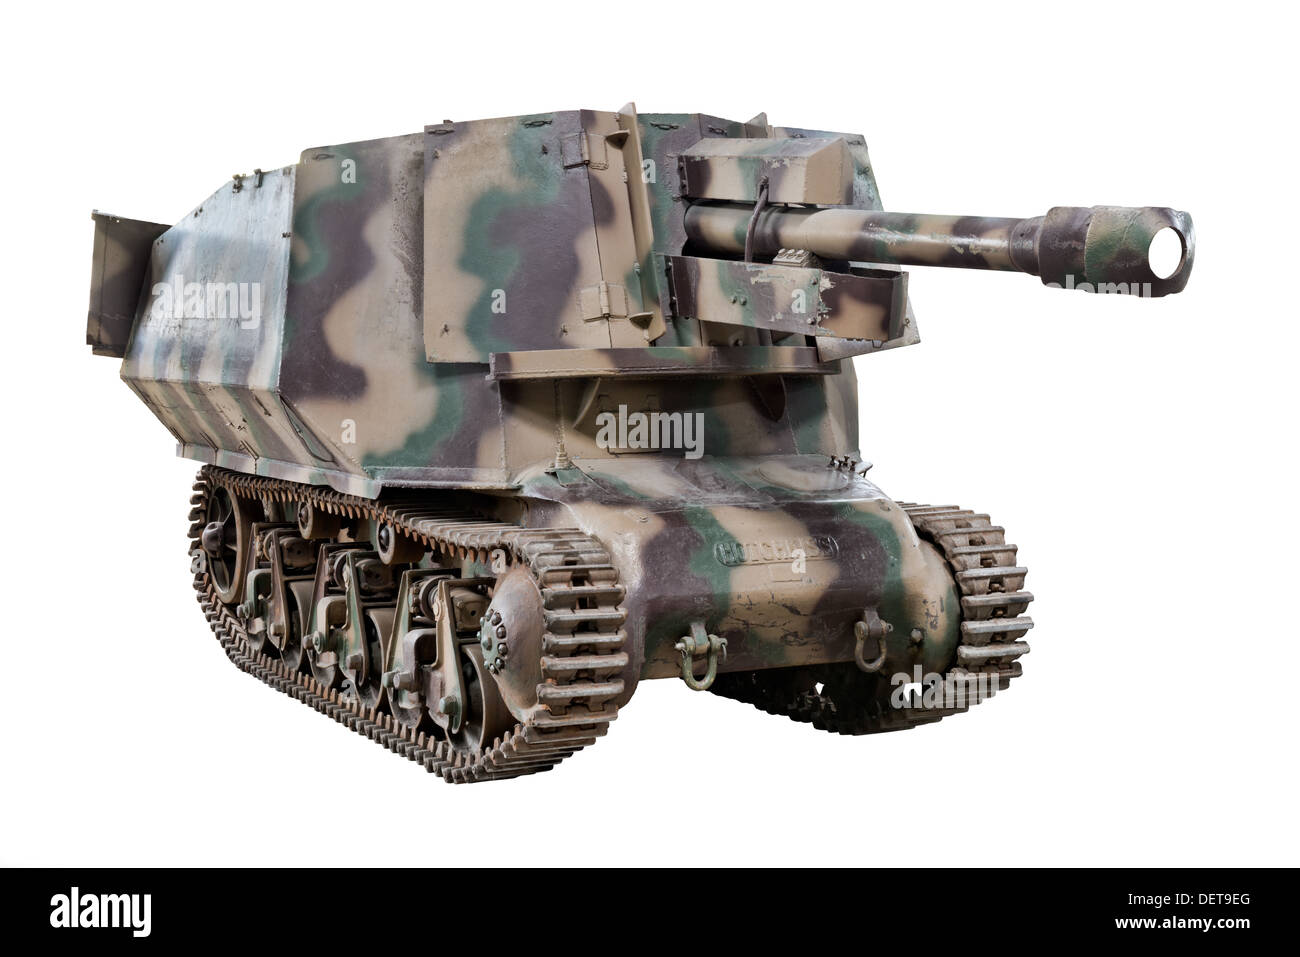 A cut out of a Marder Hotchkiss self propelled 105mm gun used by Nazi German forces during WW2 Stock Photo